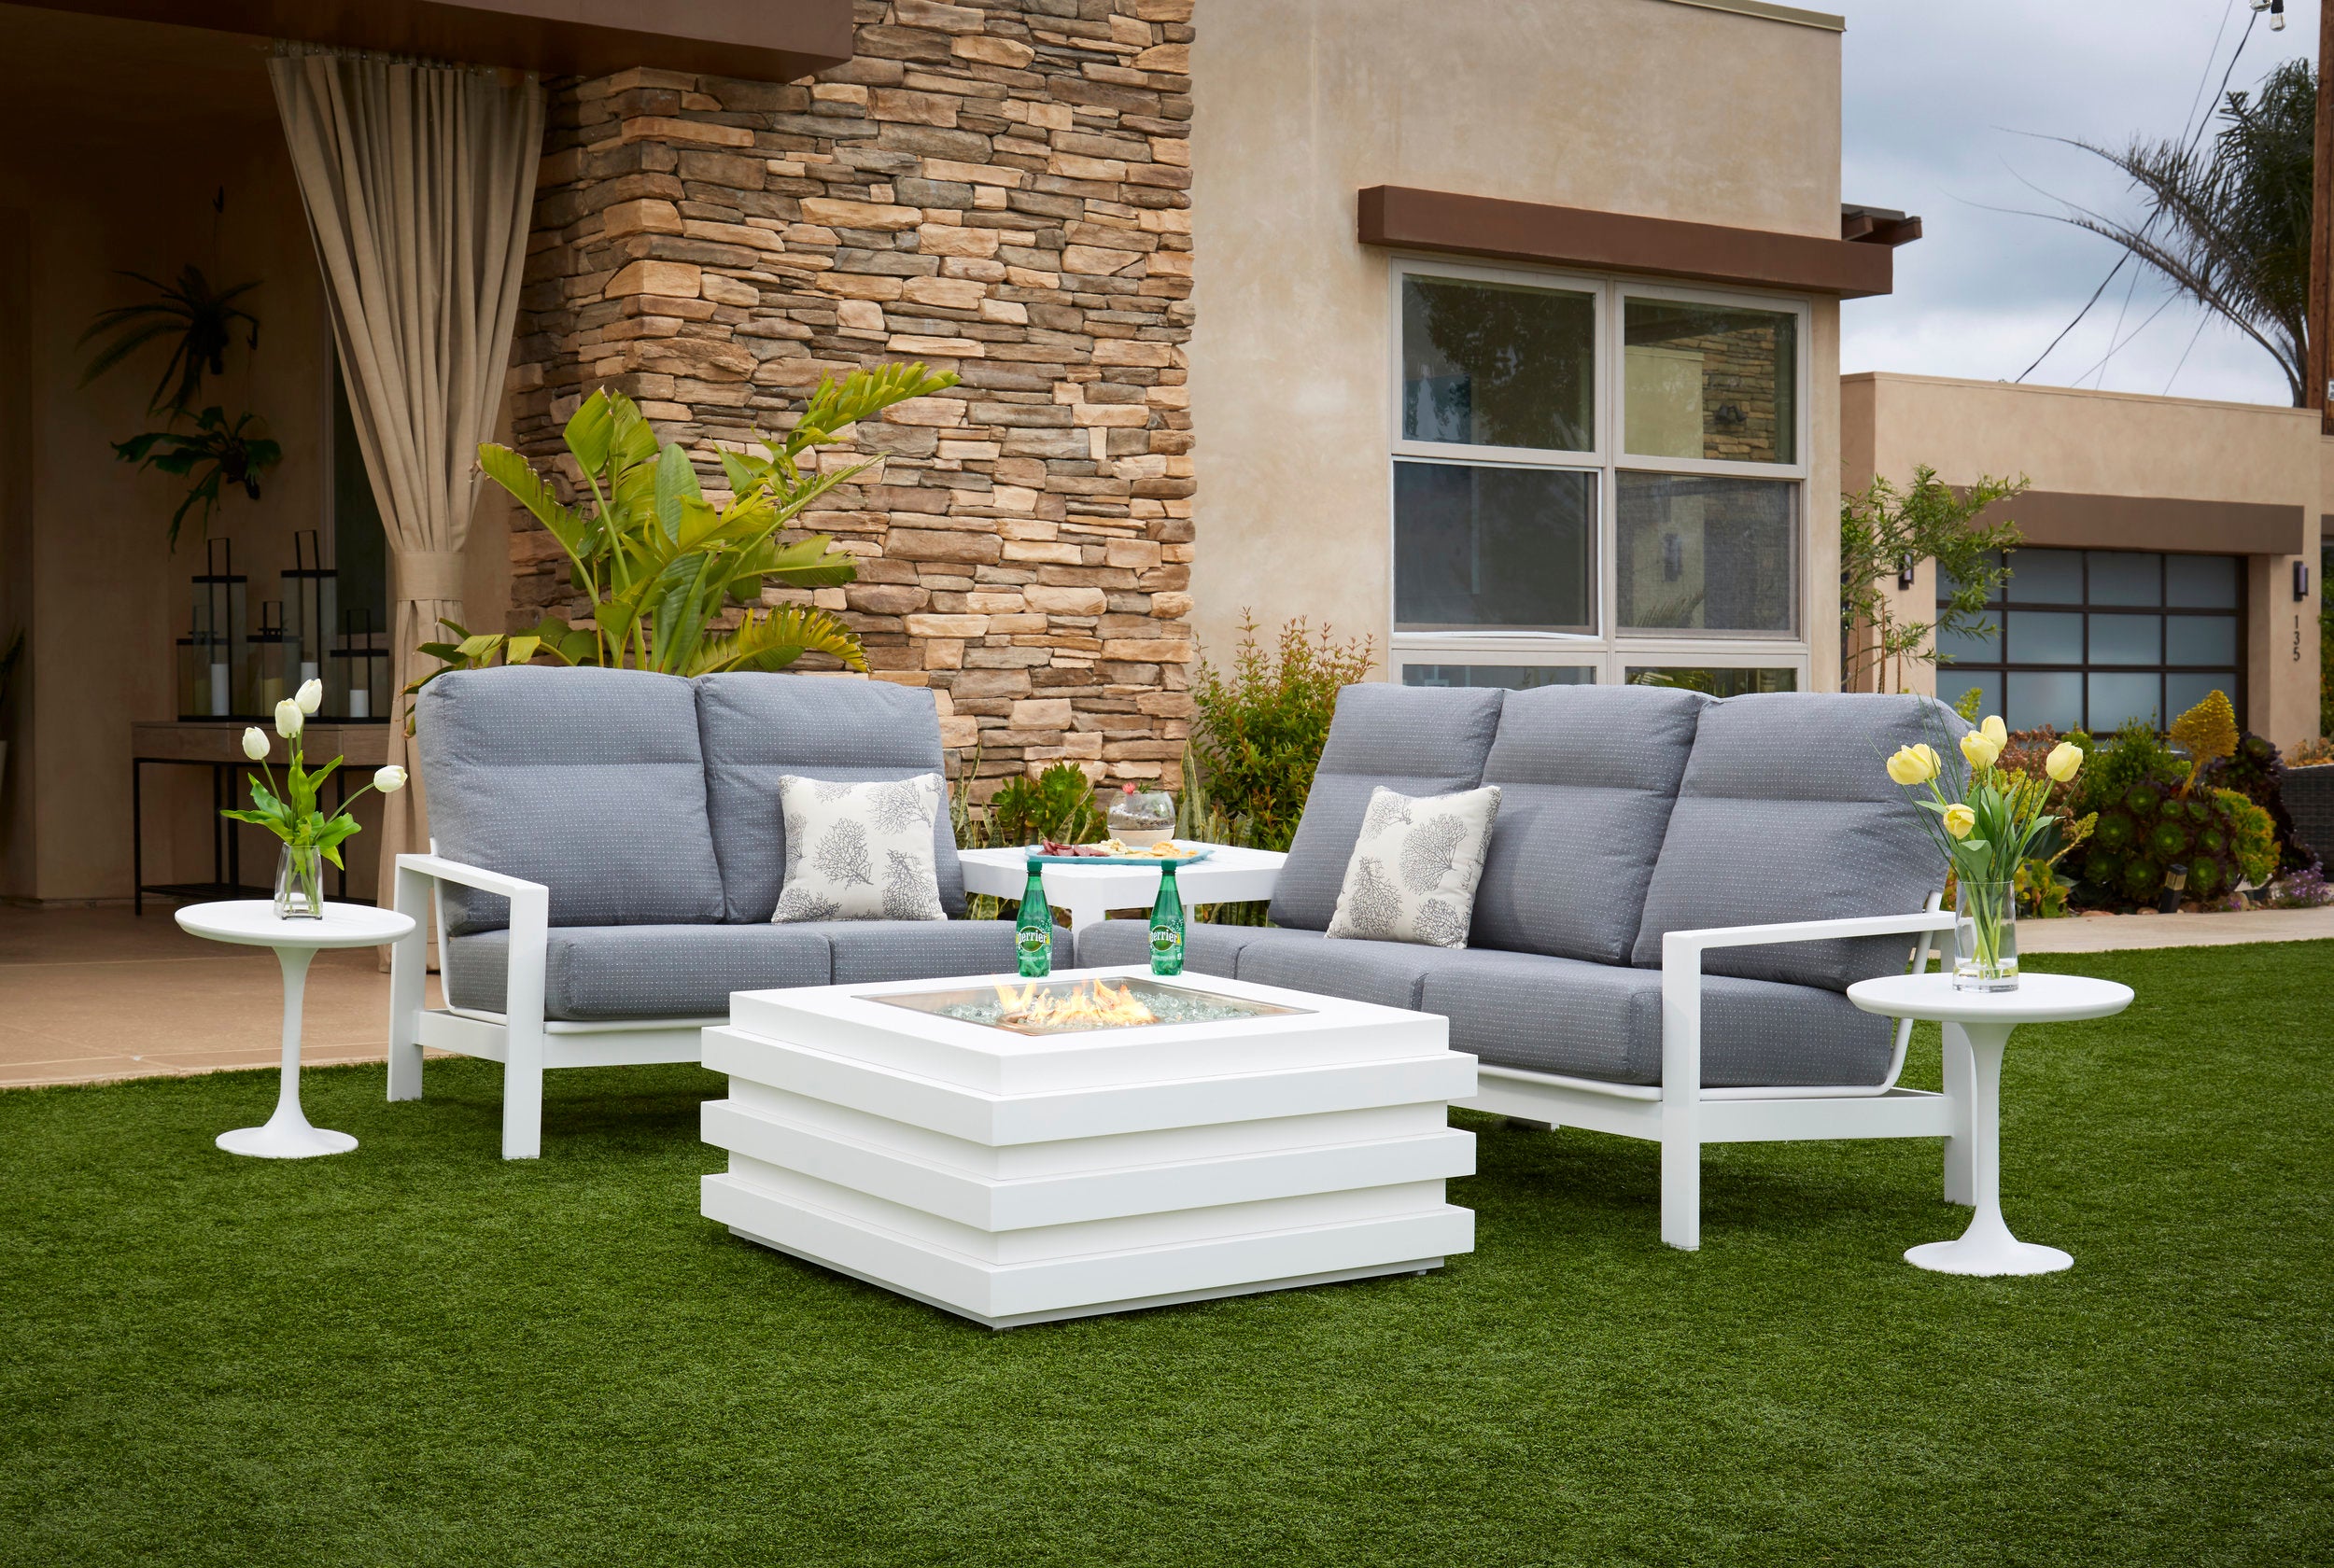 Outdoor Patio Furniture for sale in North Port, Englewood, Venice & Sarasota Florida - Indigo Pool Patio BBQ - Outdoor Living - Couch, Bar, Ledge Lounger, Fire Table, Fire Pit